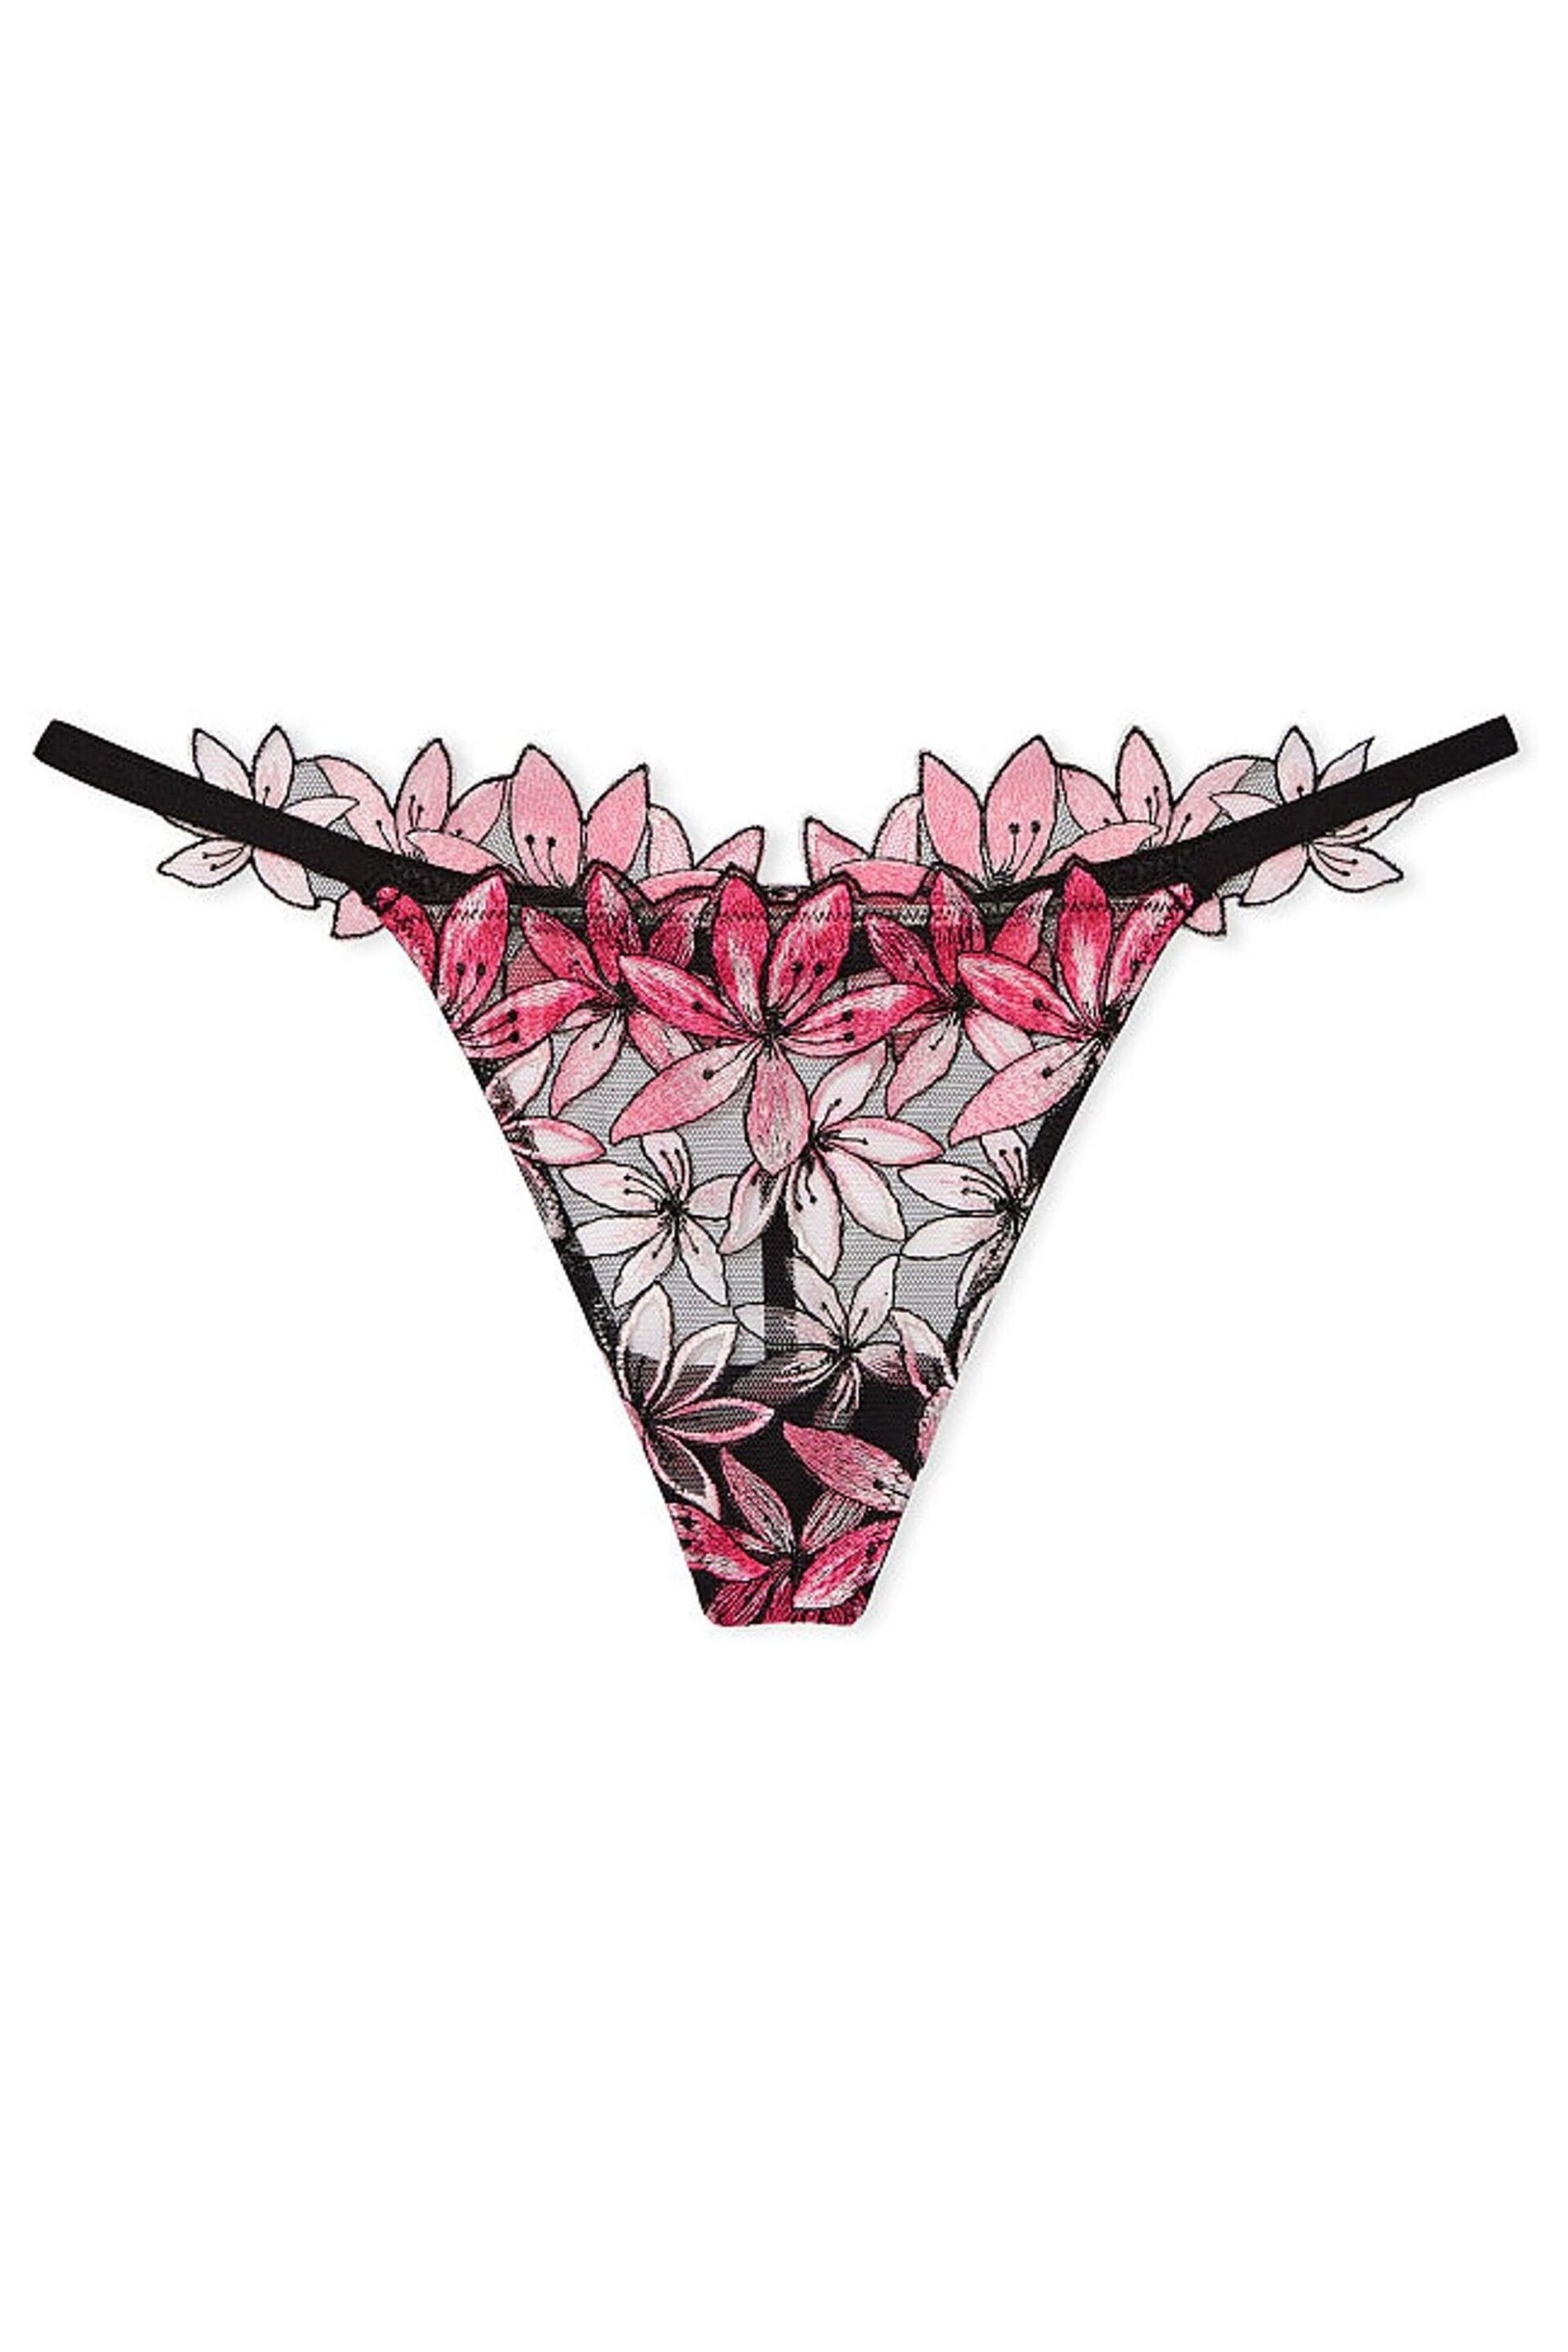 Victoria's Secret Pink Ziggy Pink G String Knickers - Image 3 of 3